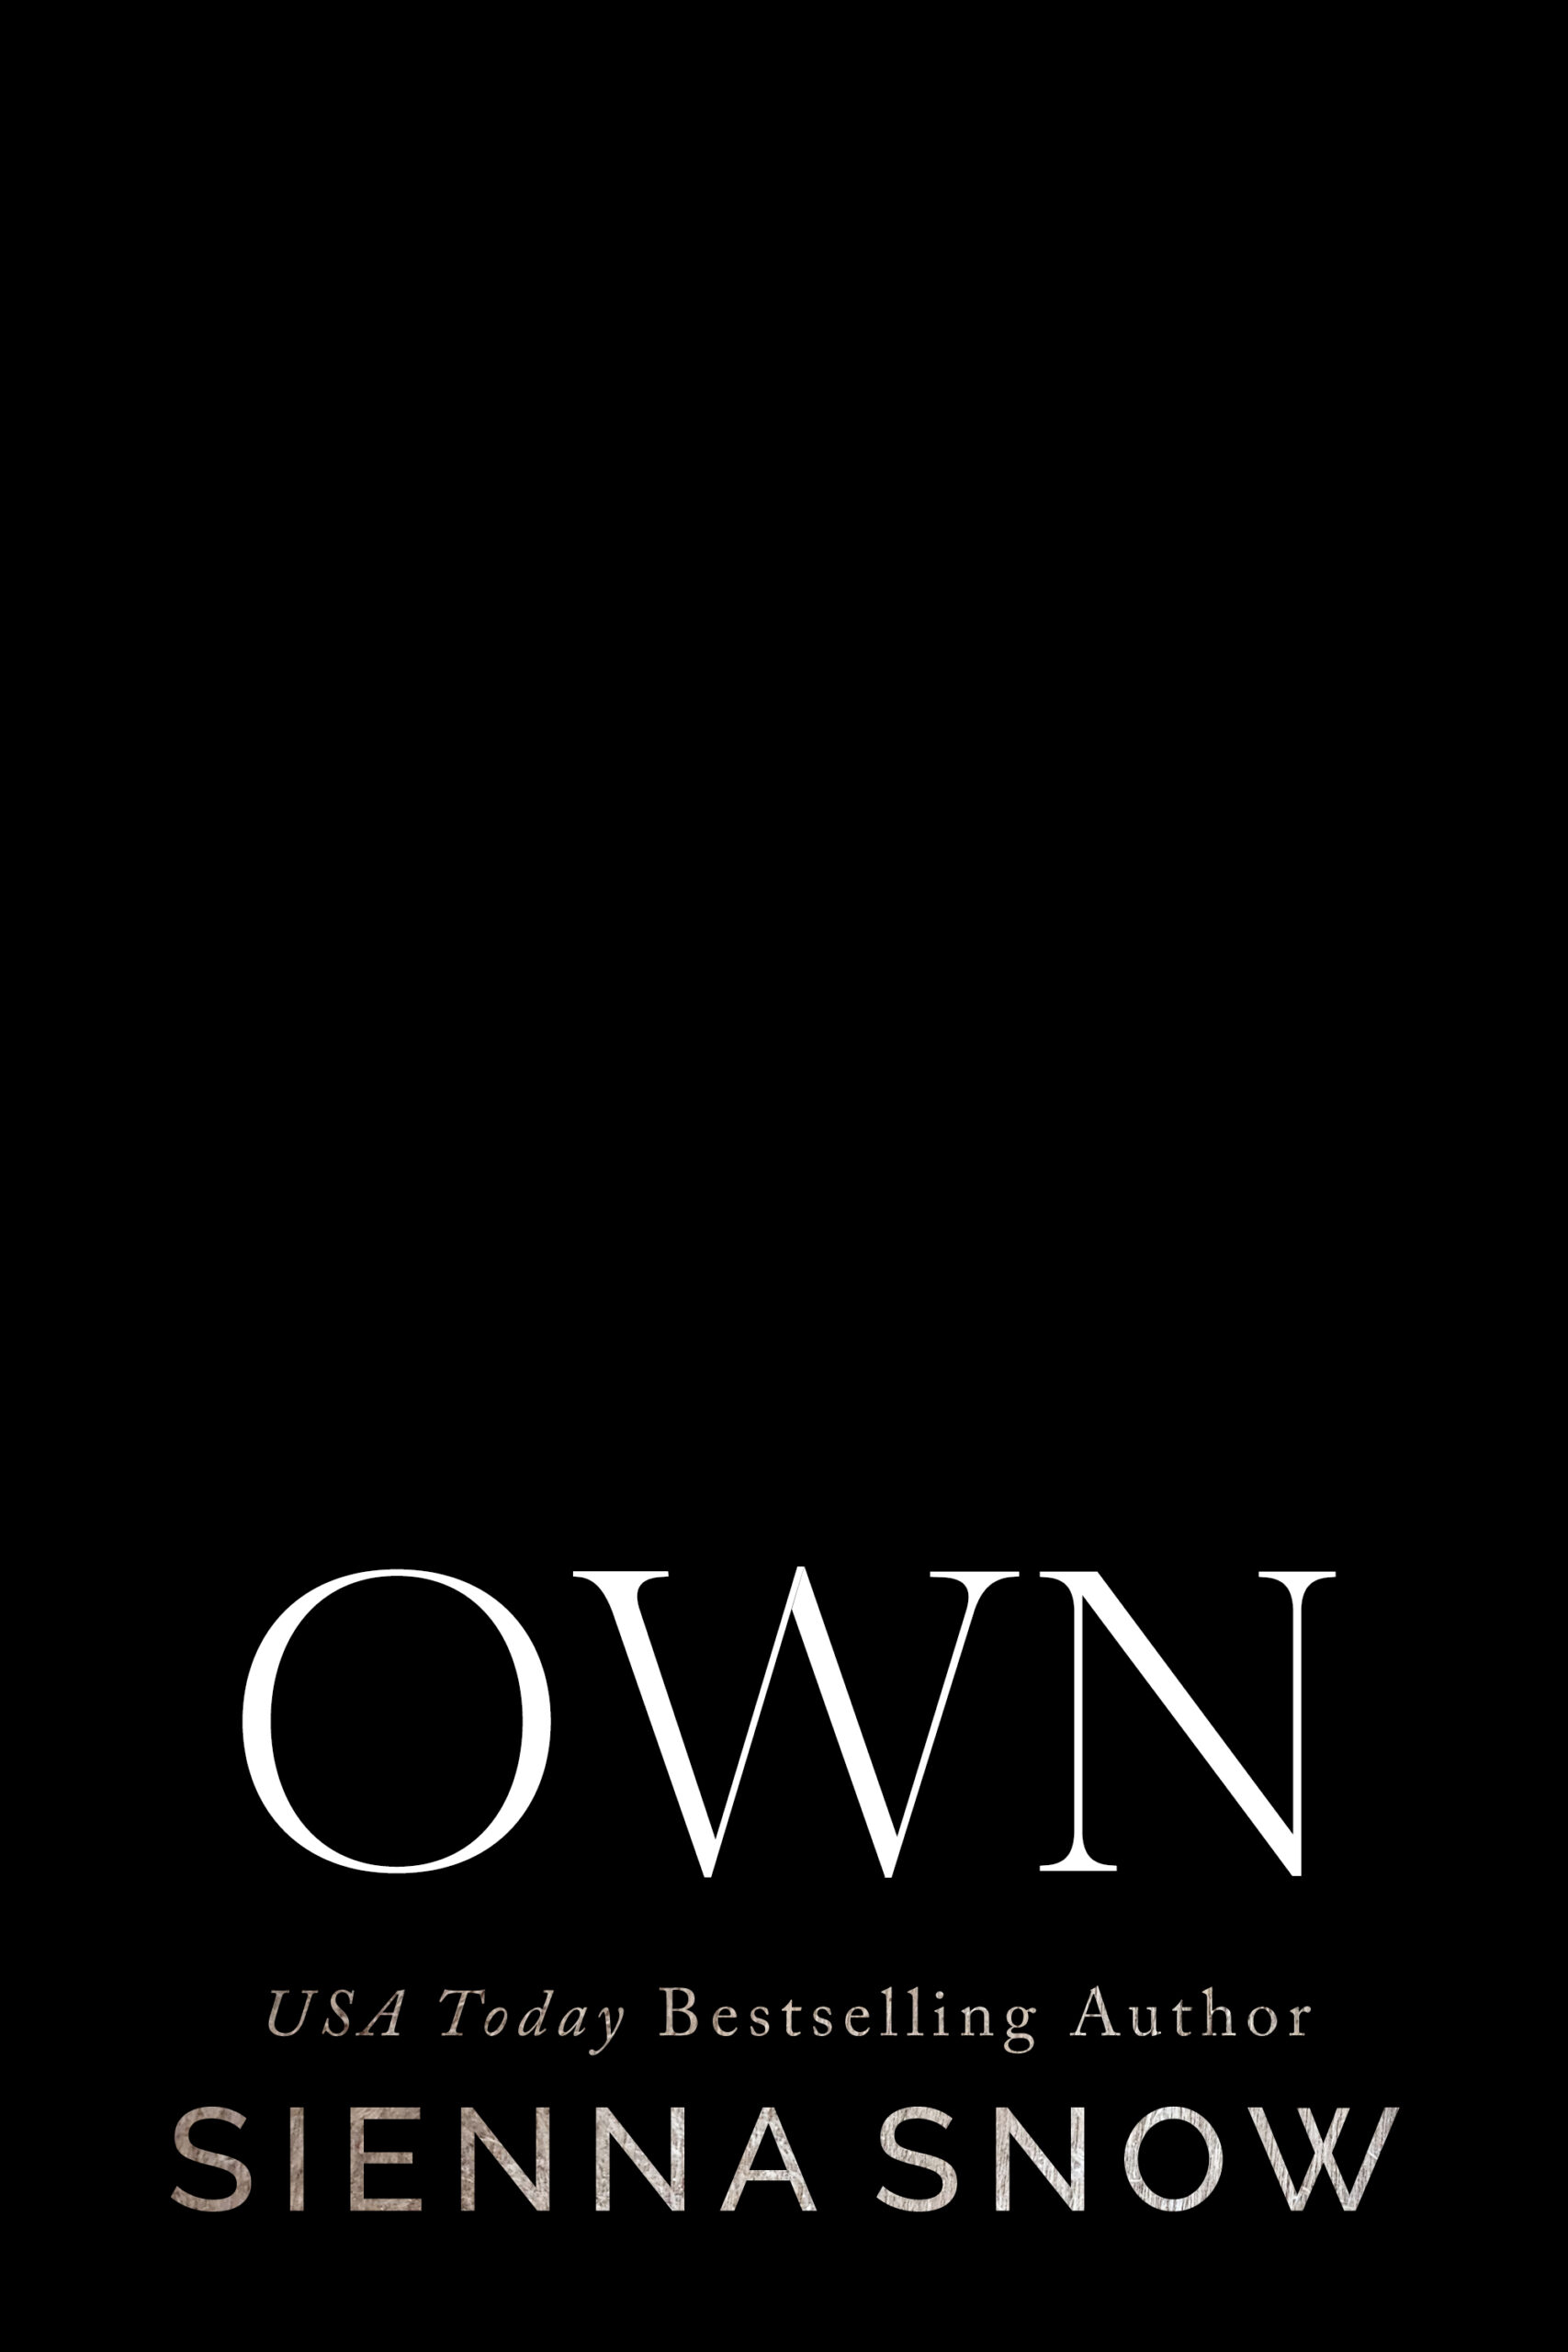 Own by Sienna Snow